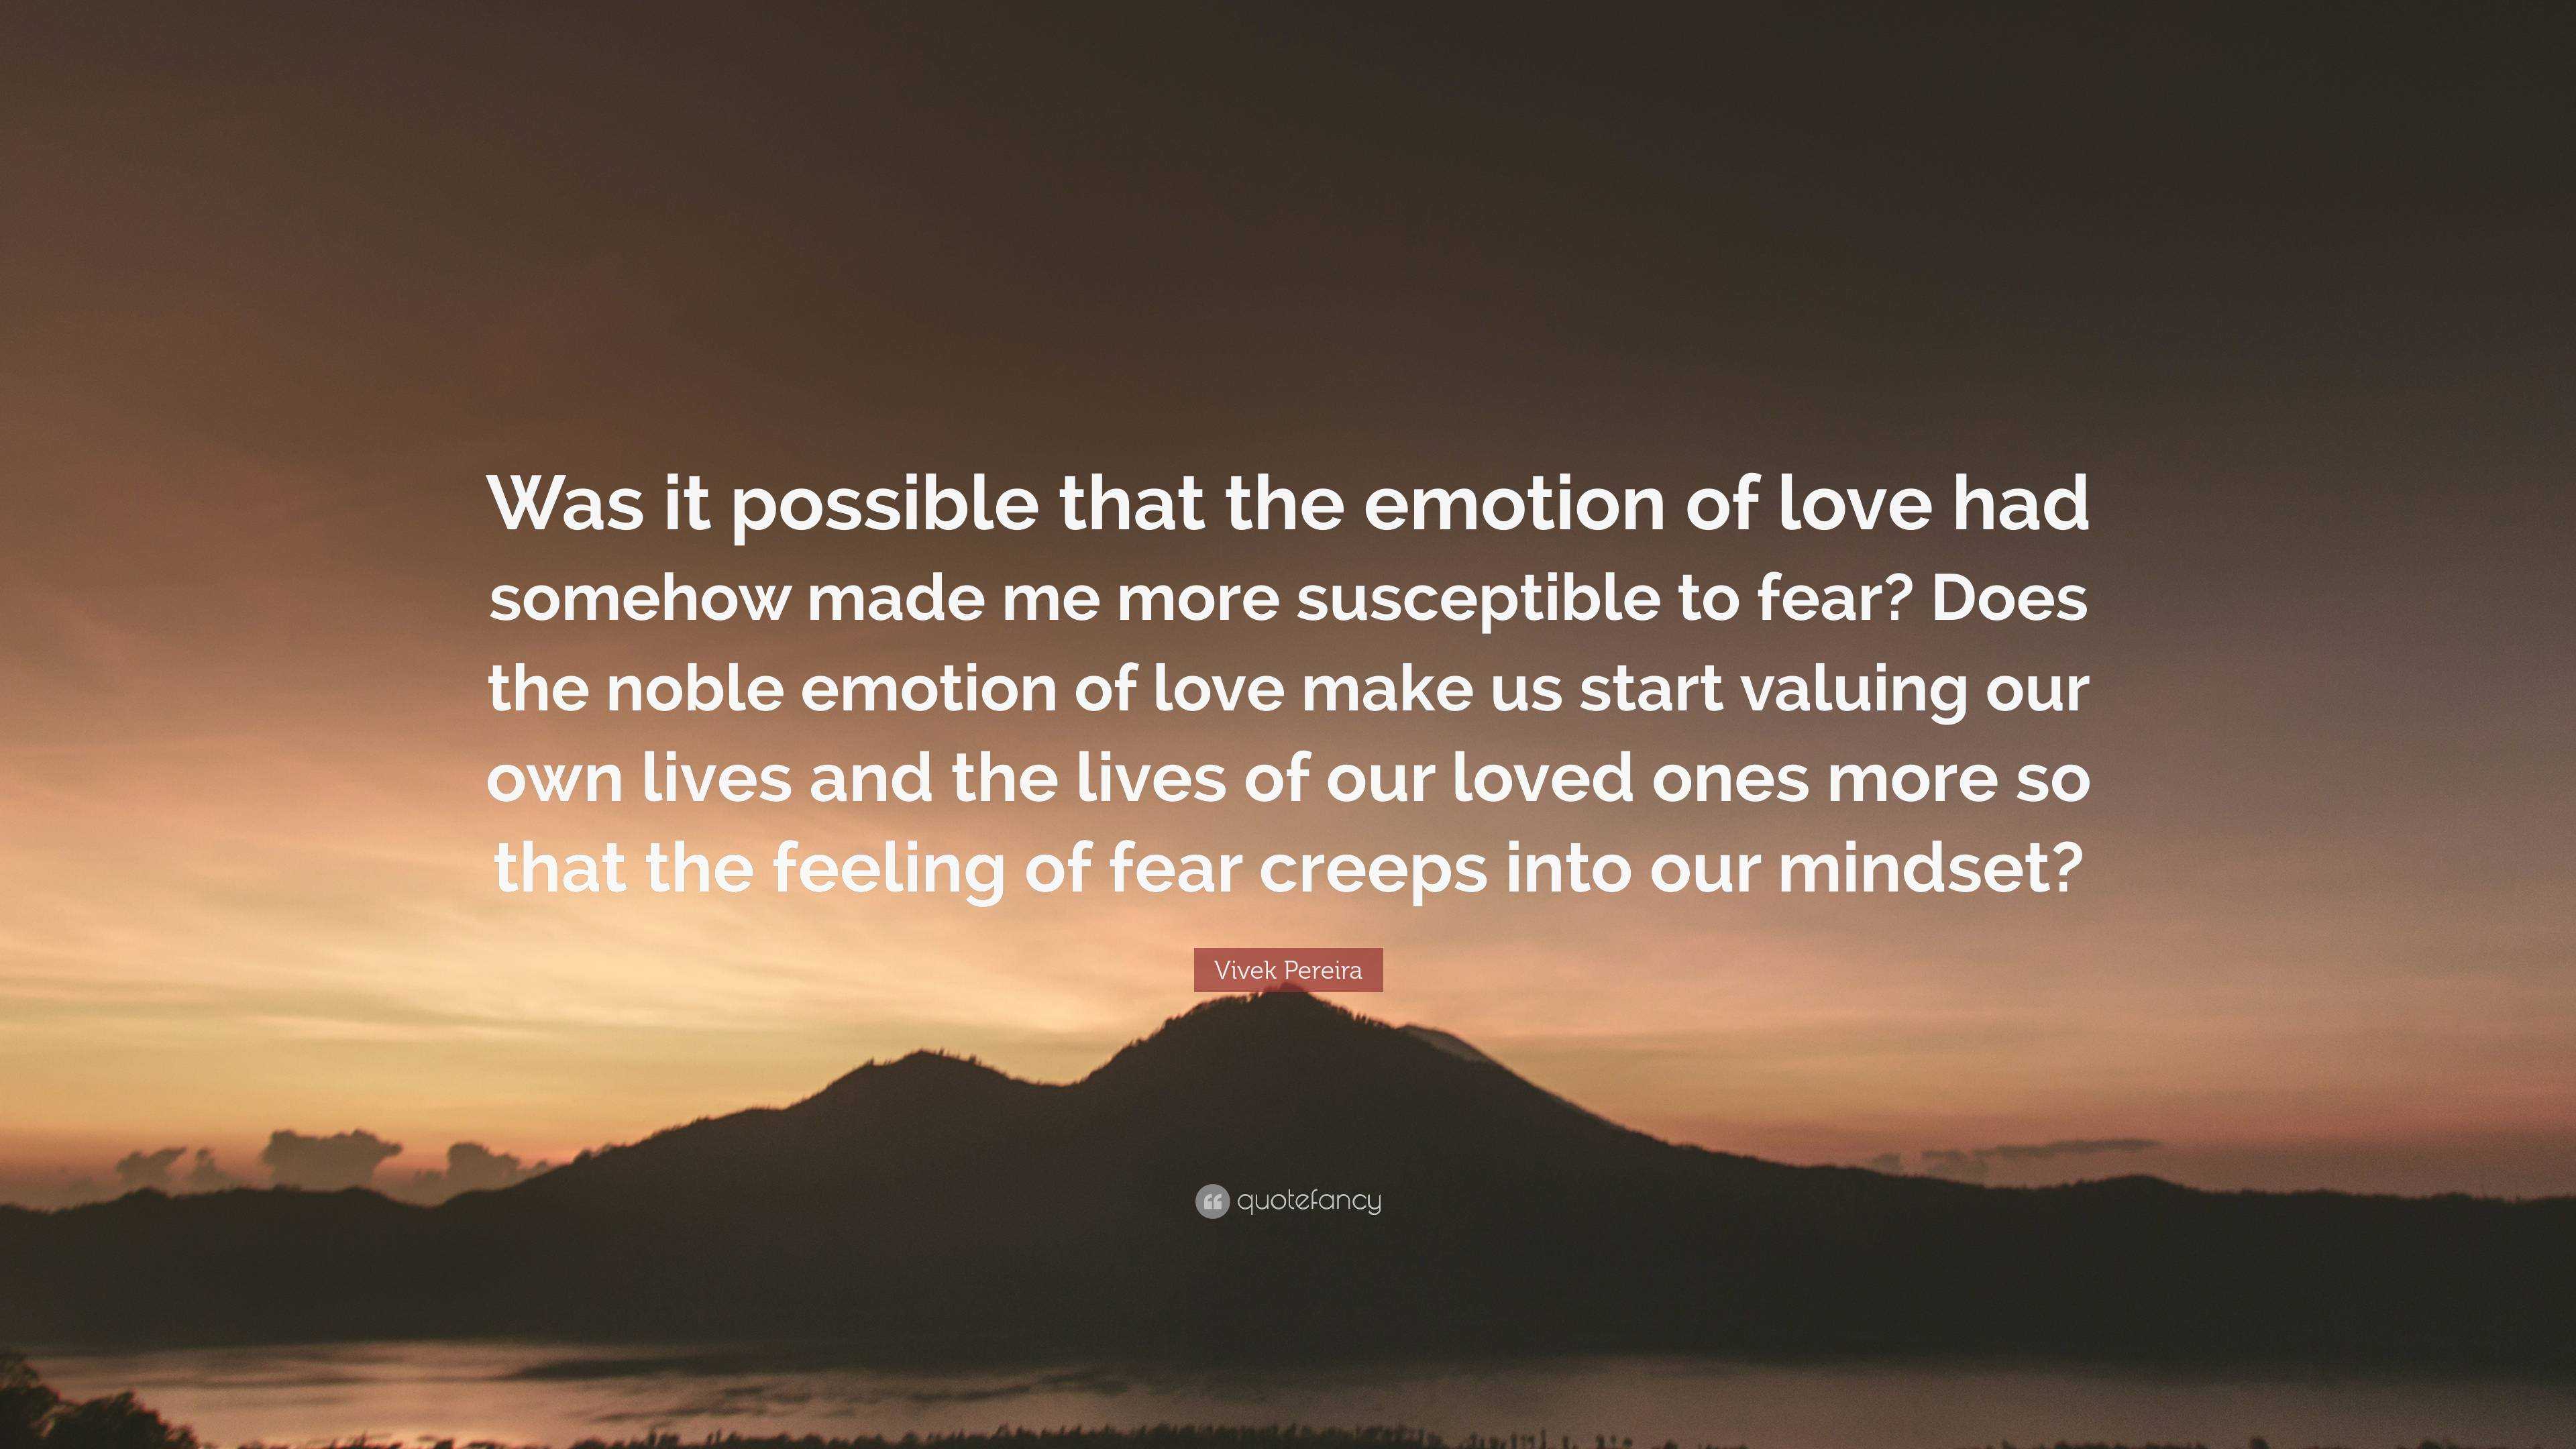 Vivek Pereira Quote: “Was it possible that the emotion of love had ...